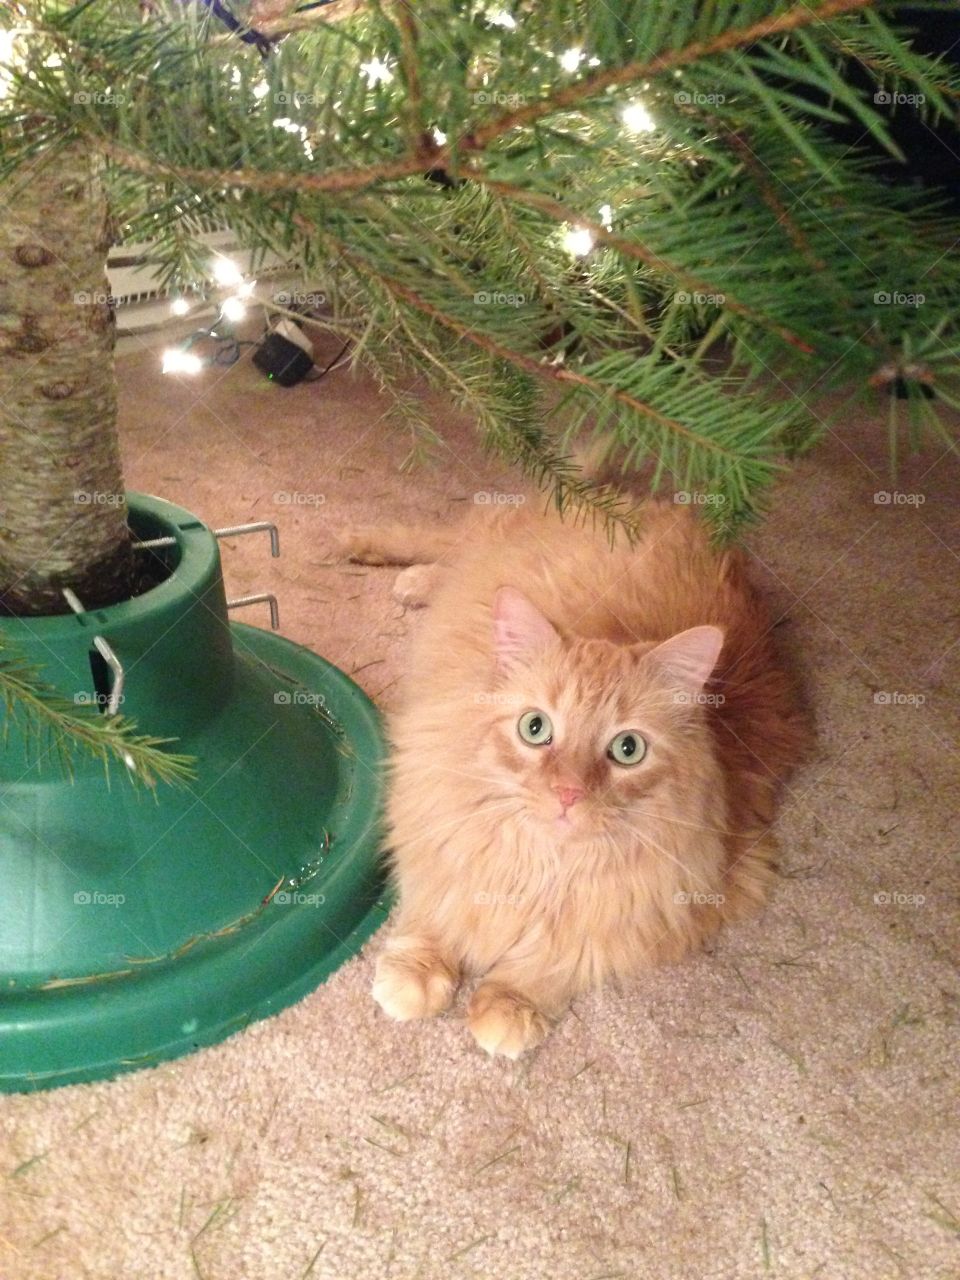 The cat loves the Christmas tree!!